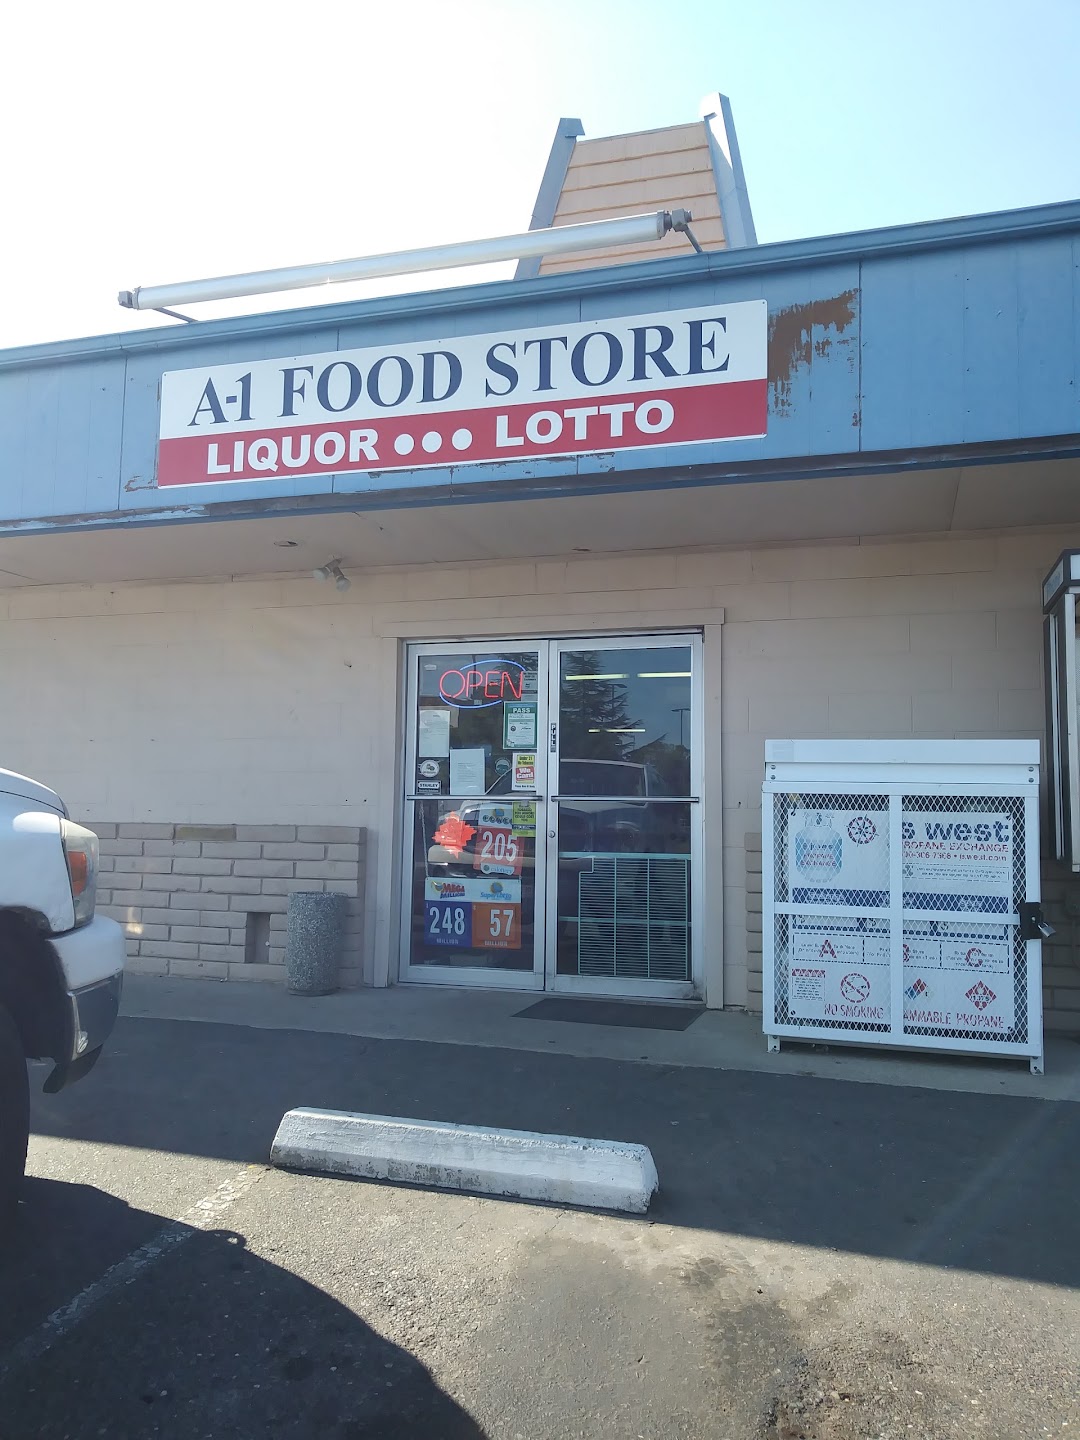 A-1 Food Store